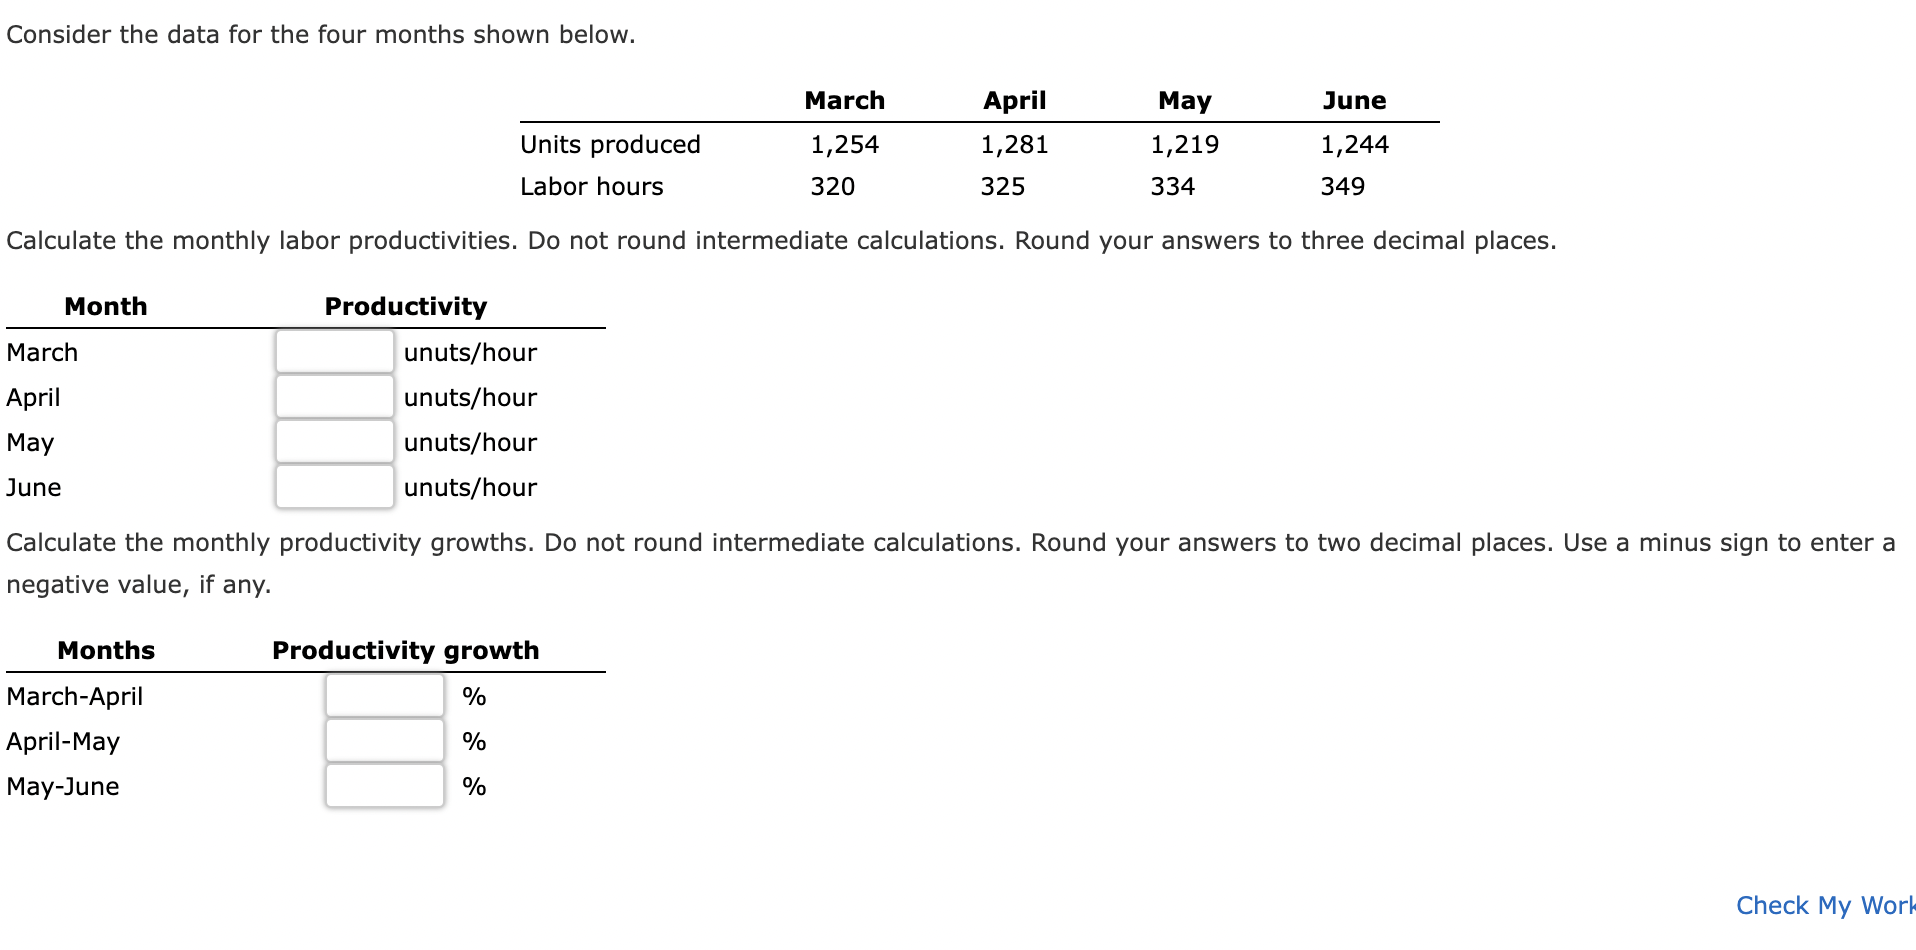 Consider the data for the four months shown below. Month March April May June June Units produced 1,244 Labor